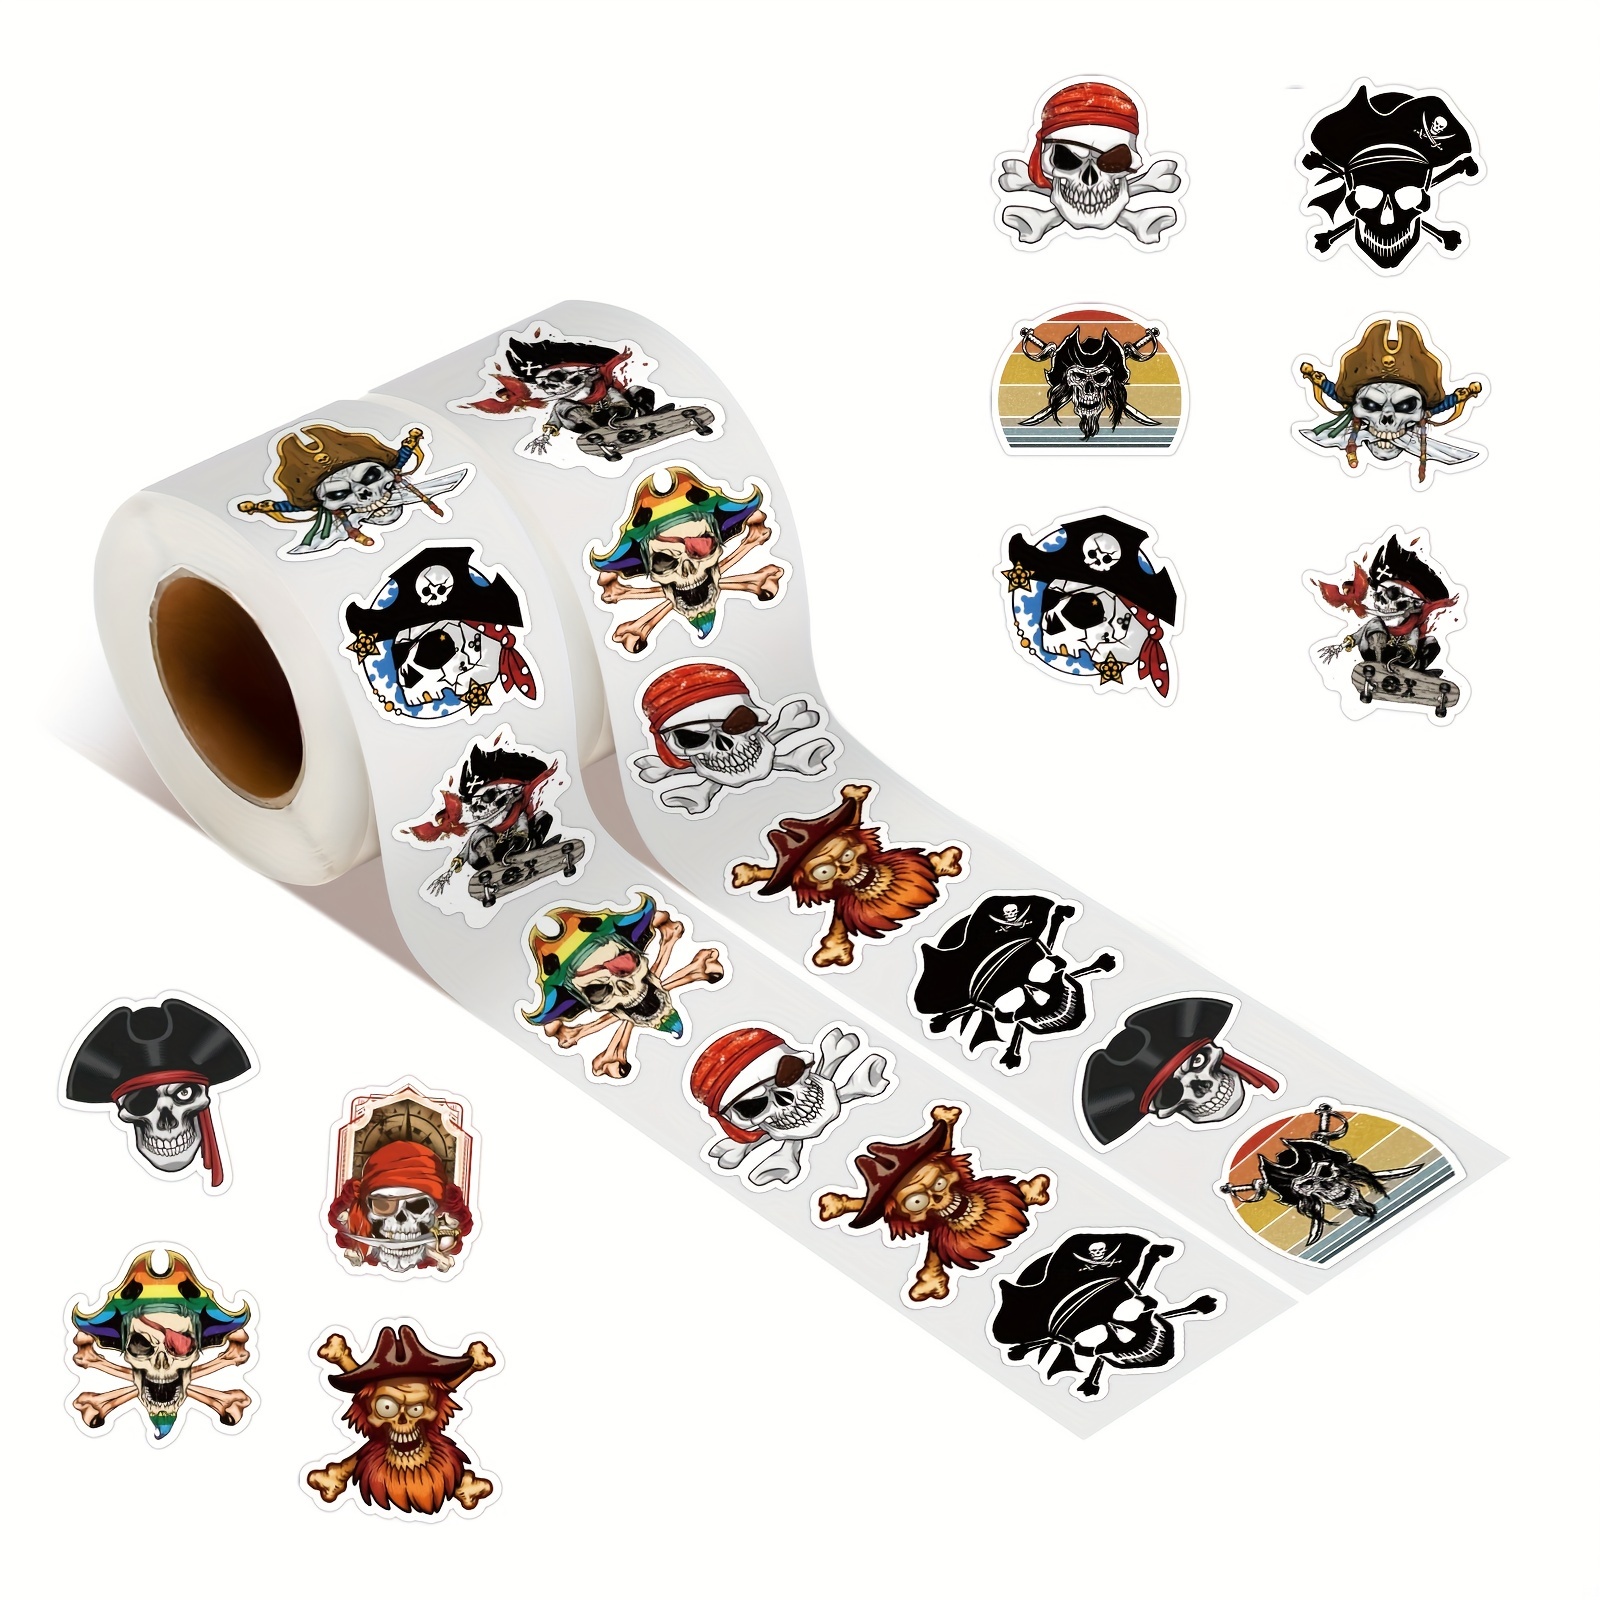 

500pcs Pirates Stickers Rolls, Jolly Roger Decals For Pirate Party, Dovipta Vinyl Stickers For Laptop Water Bottles Skateboard Guitar Suitcase, Stickers Gifts For, Teens, Adults